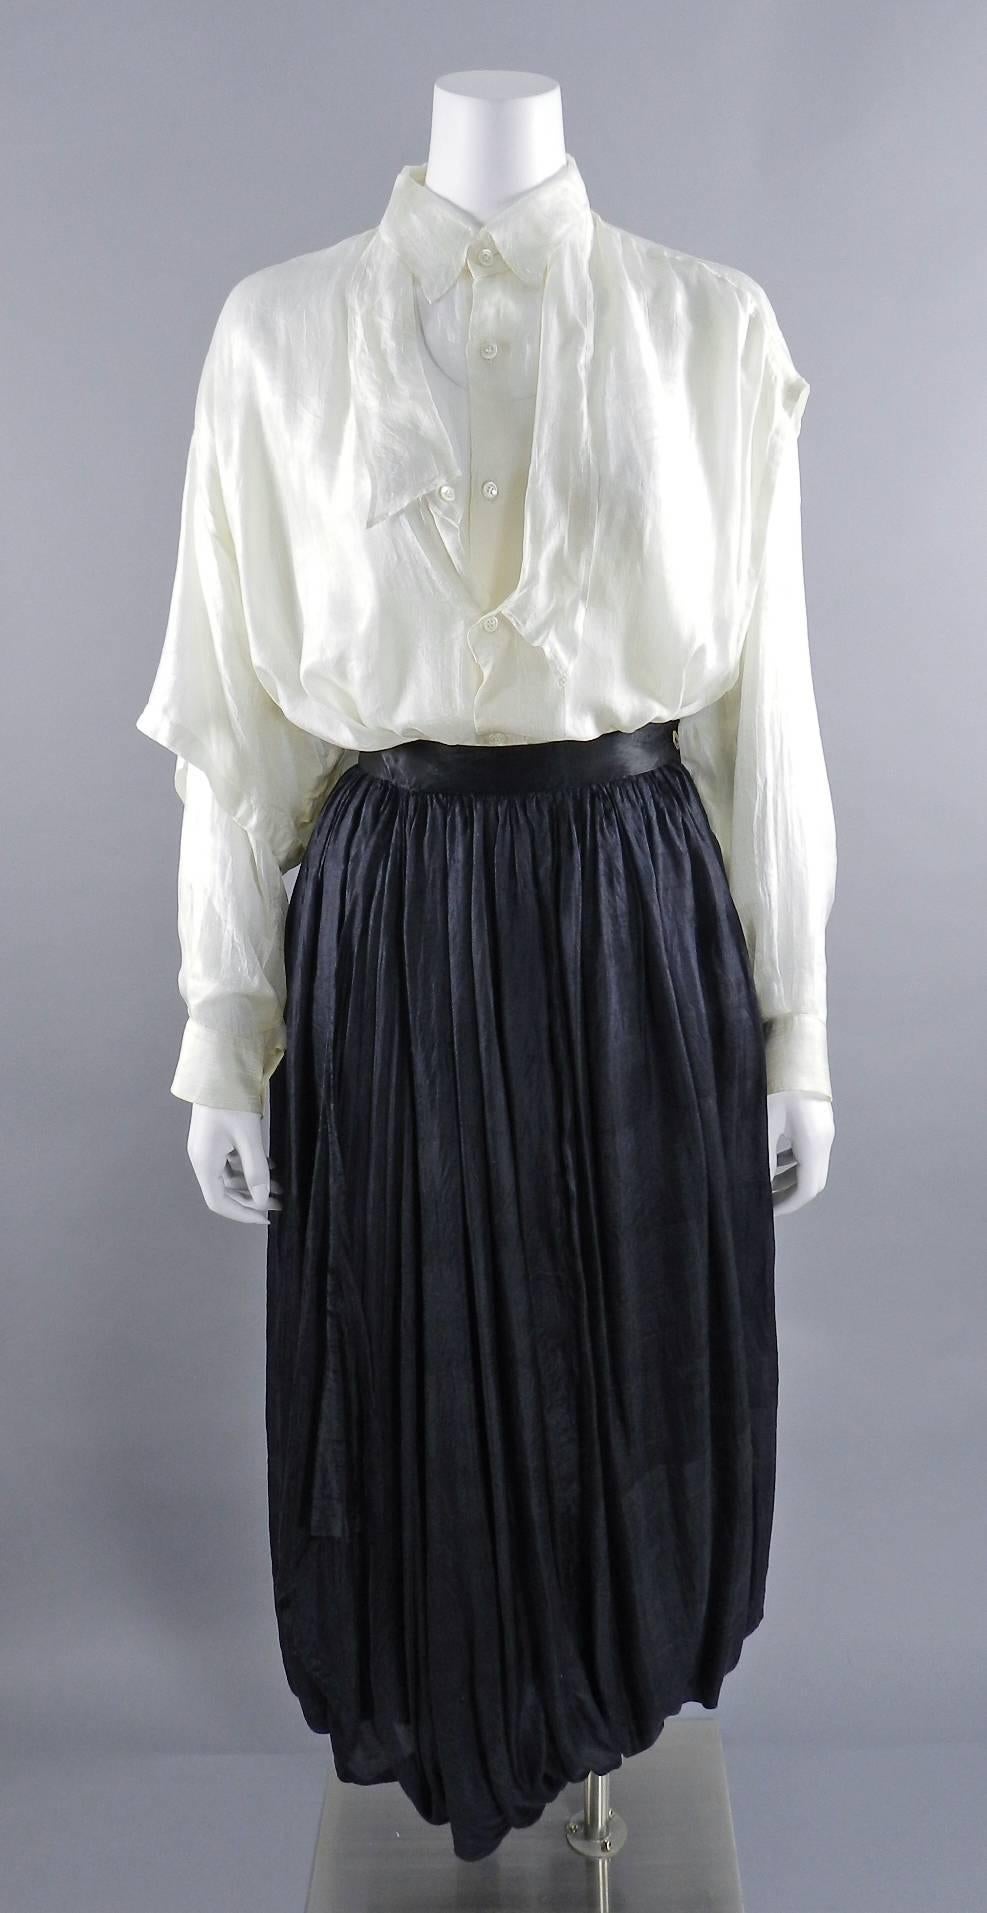 Comme des Garcons vintage circa 1980’s distressed skirt and blouse. Material is very light silk that looks intentionally pulled and distressed. White blouse buttons down front and has a second layer that buttons down over it. Skirt is multi layered,